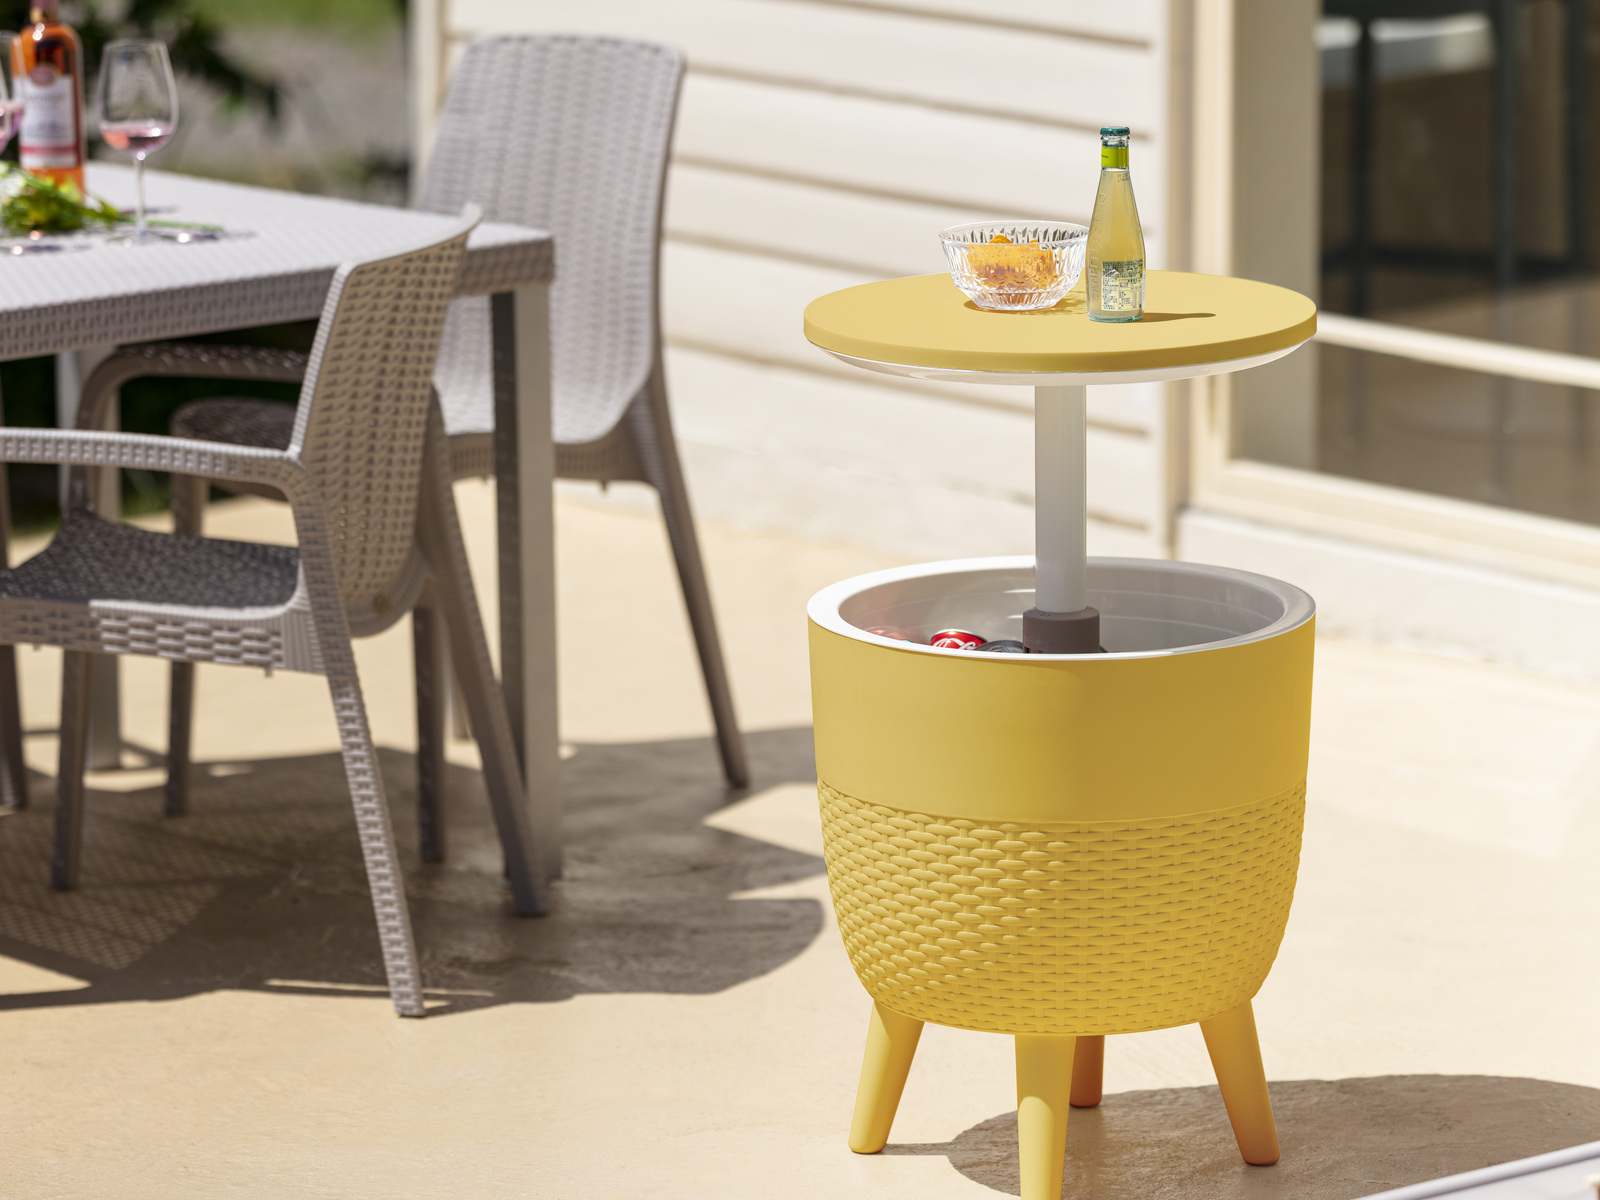 520a2555-2-1 Cancún Outdoor Cooler Bar / Cocktail / Coffee 3-in-1 Table - Lagoon Design Furniture